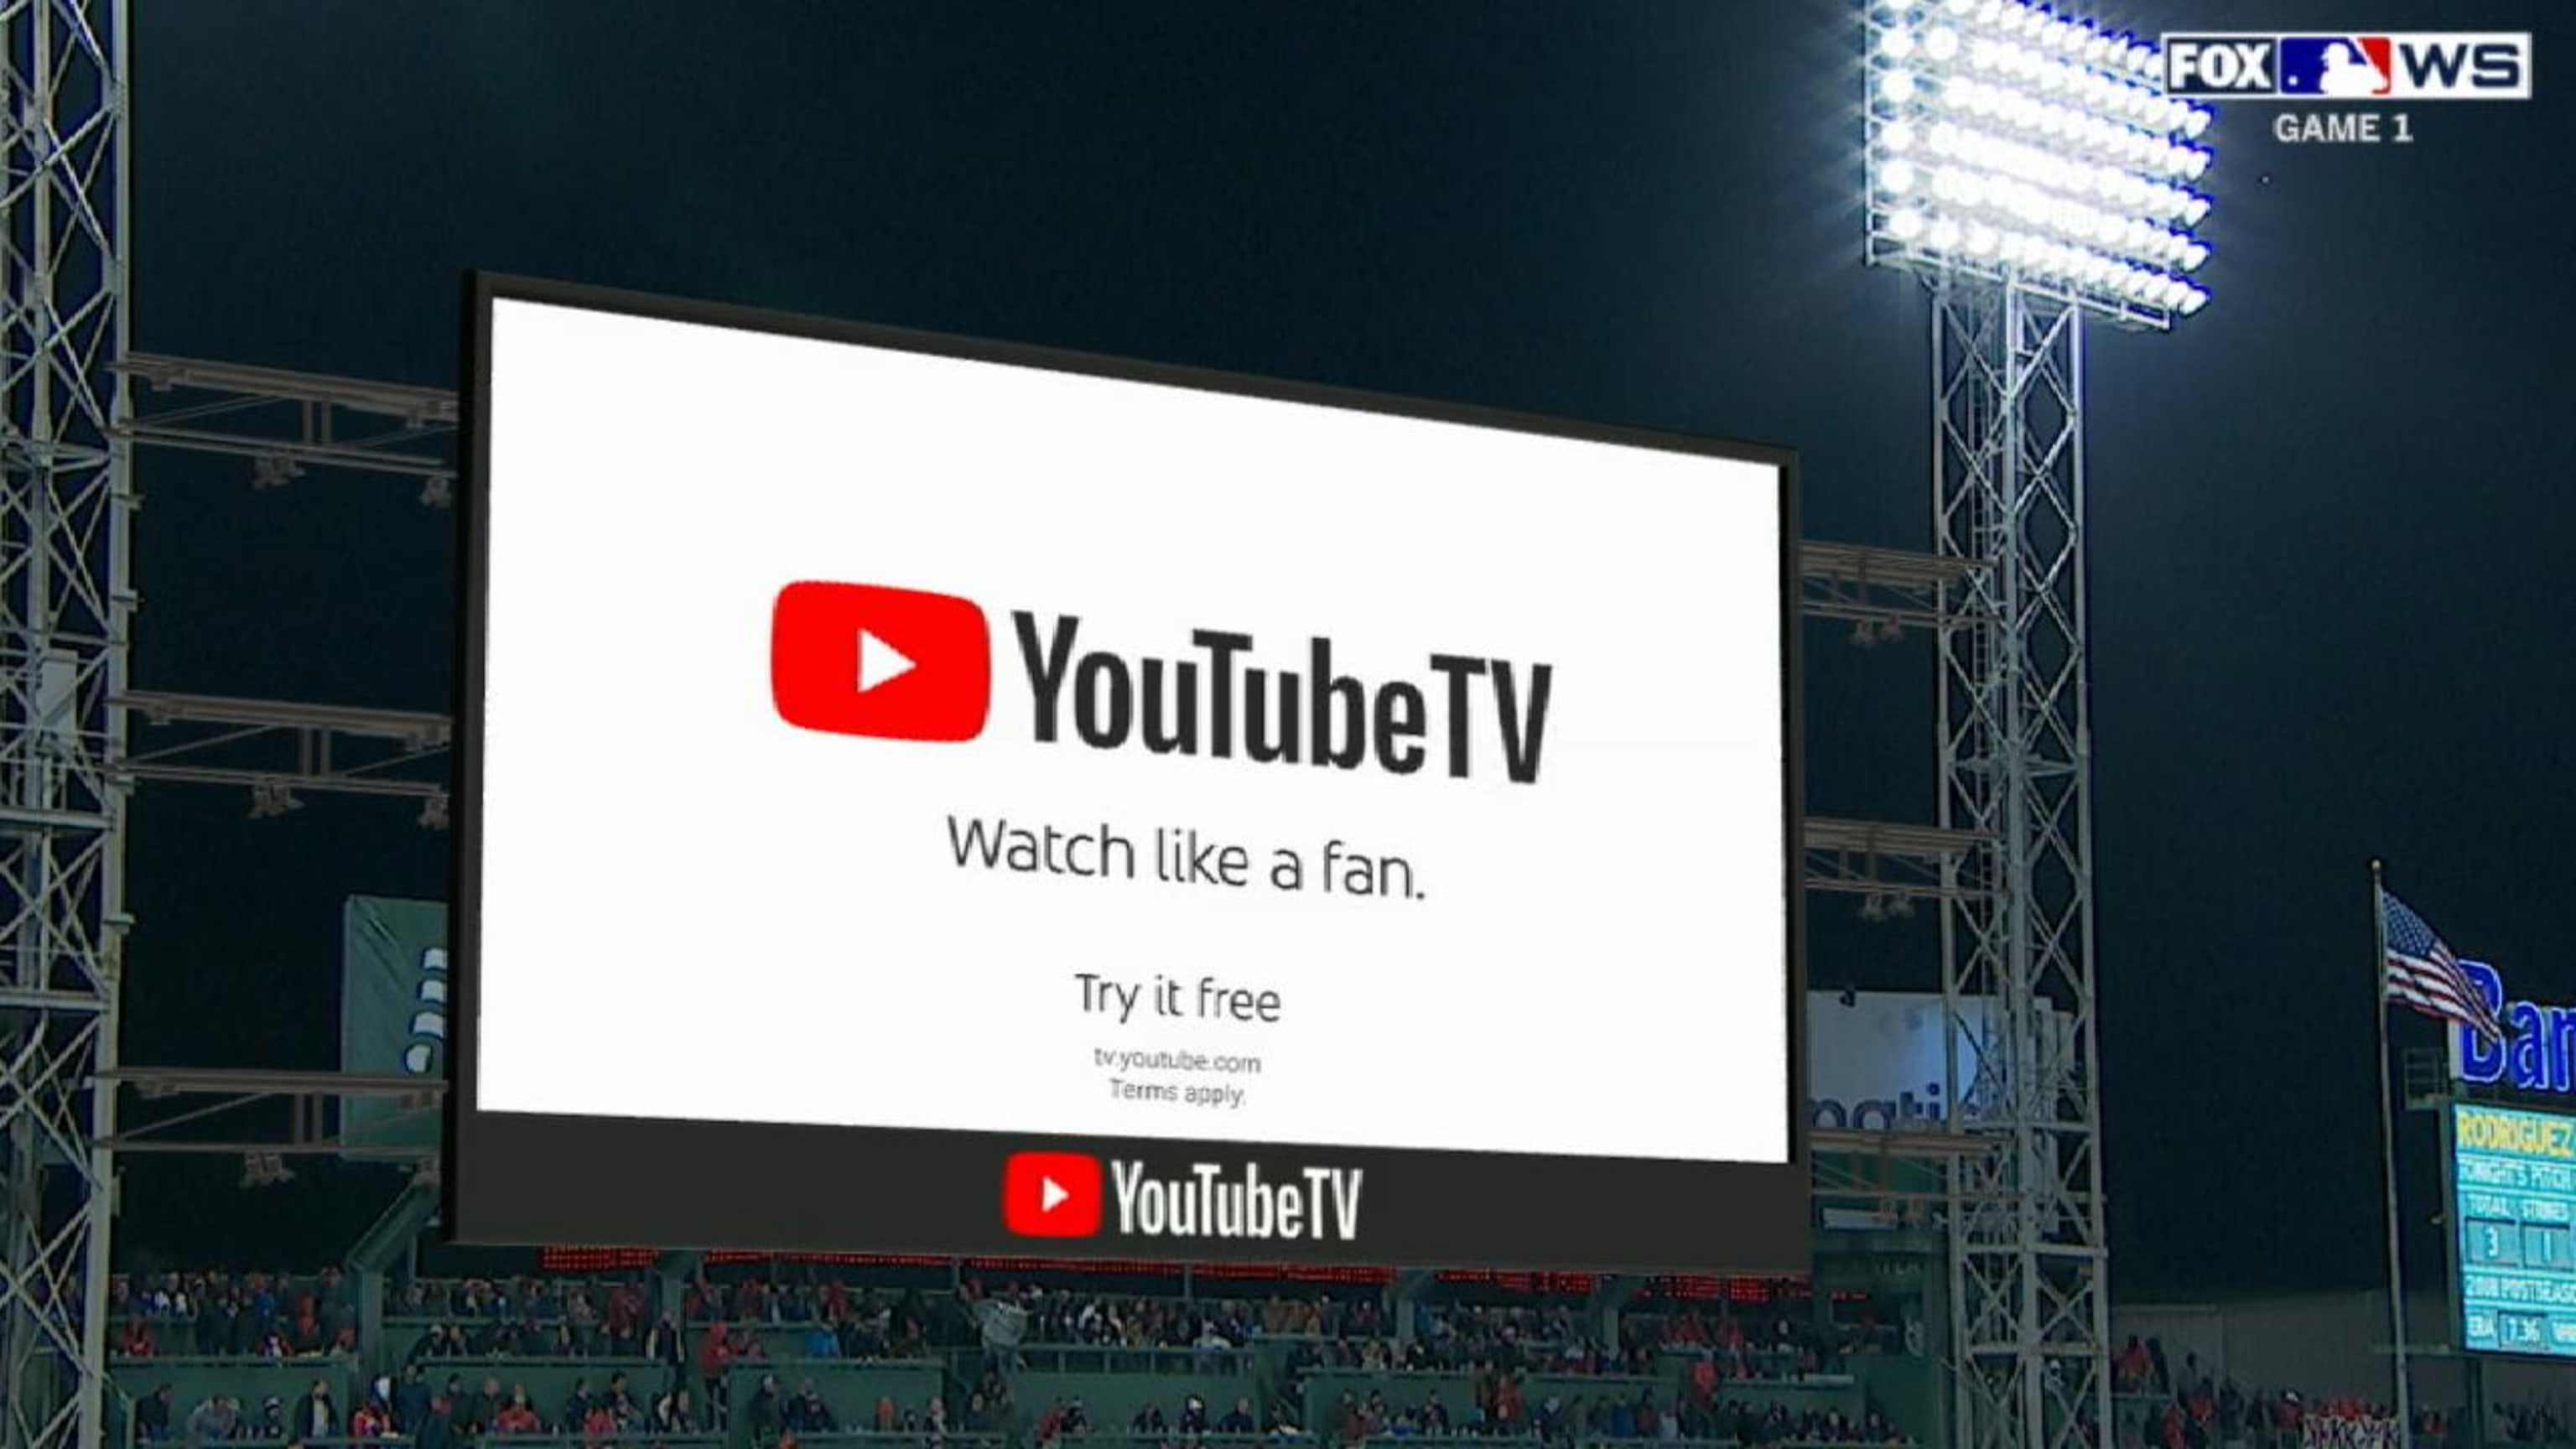 YouTube TV, MLB debut augmented reality ads